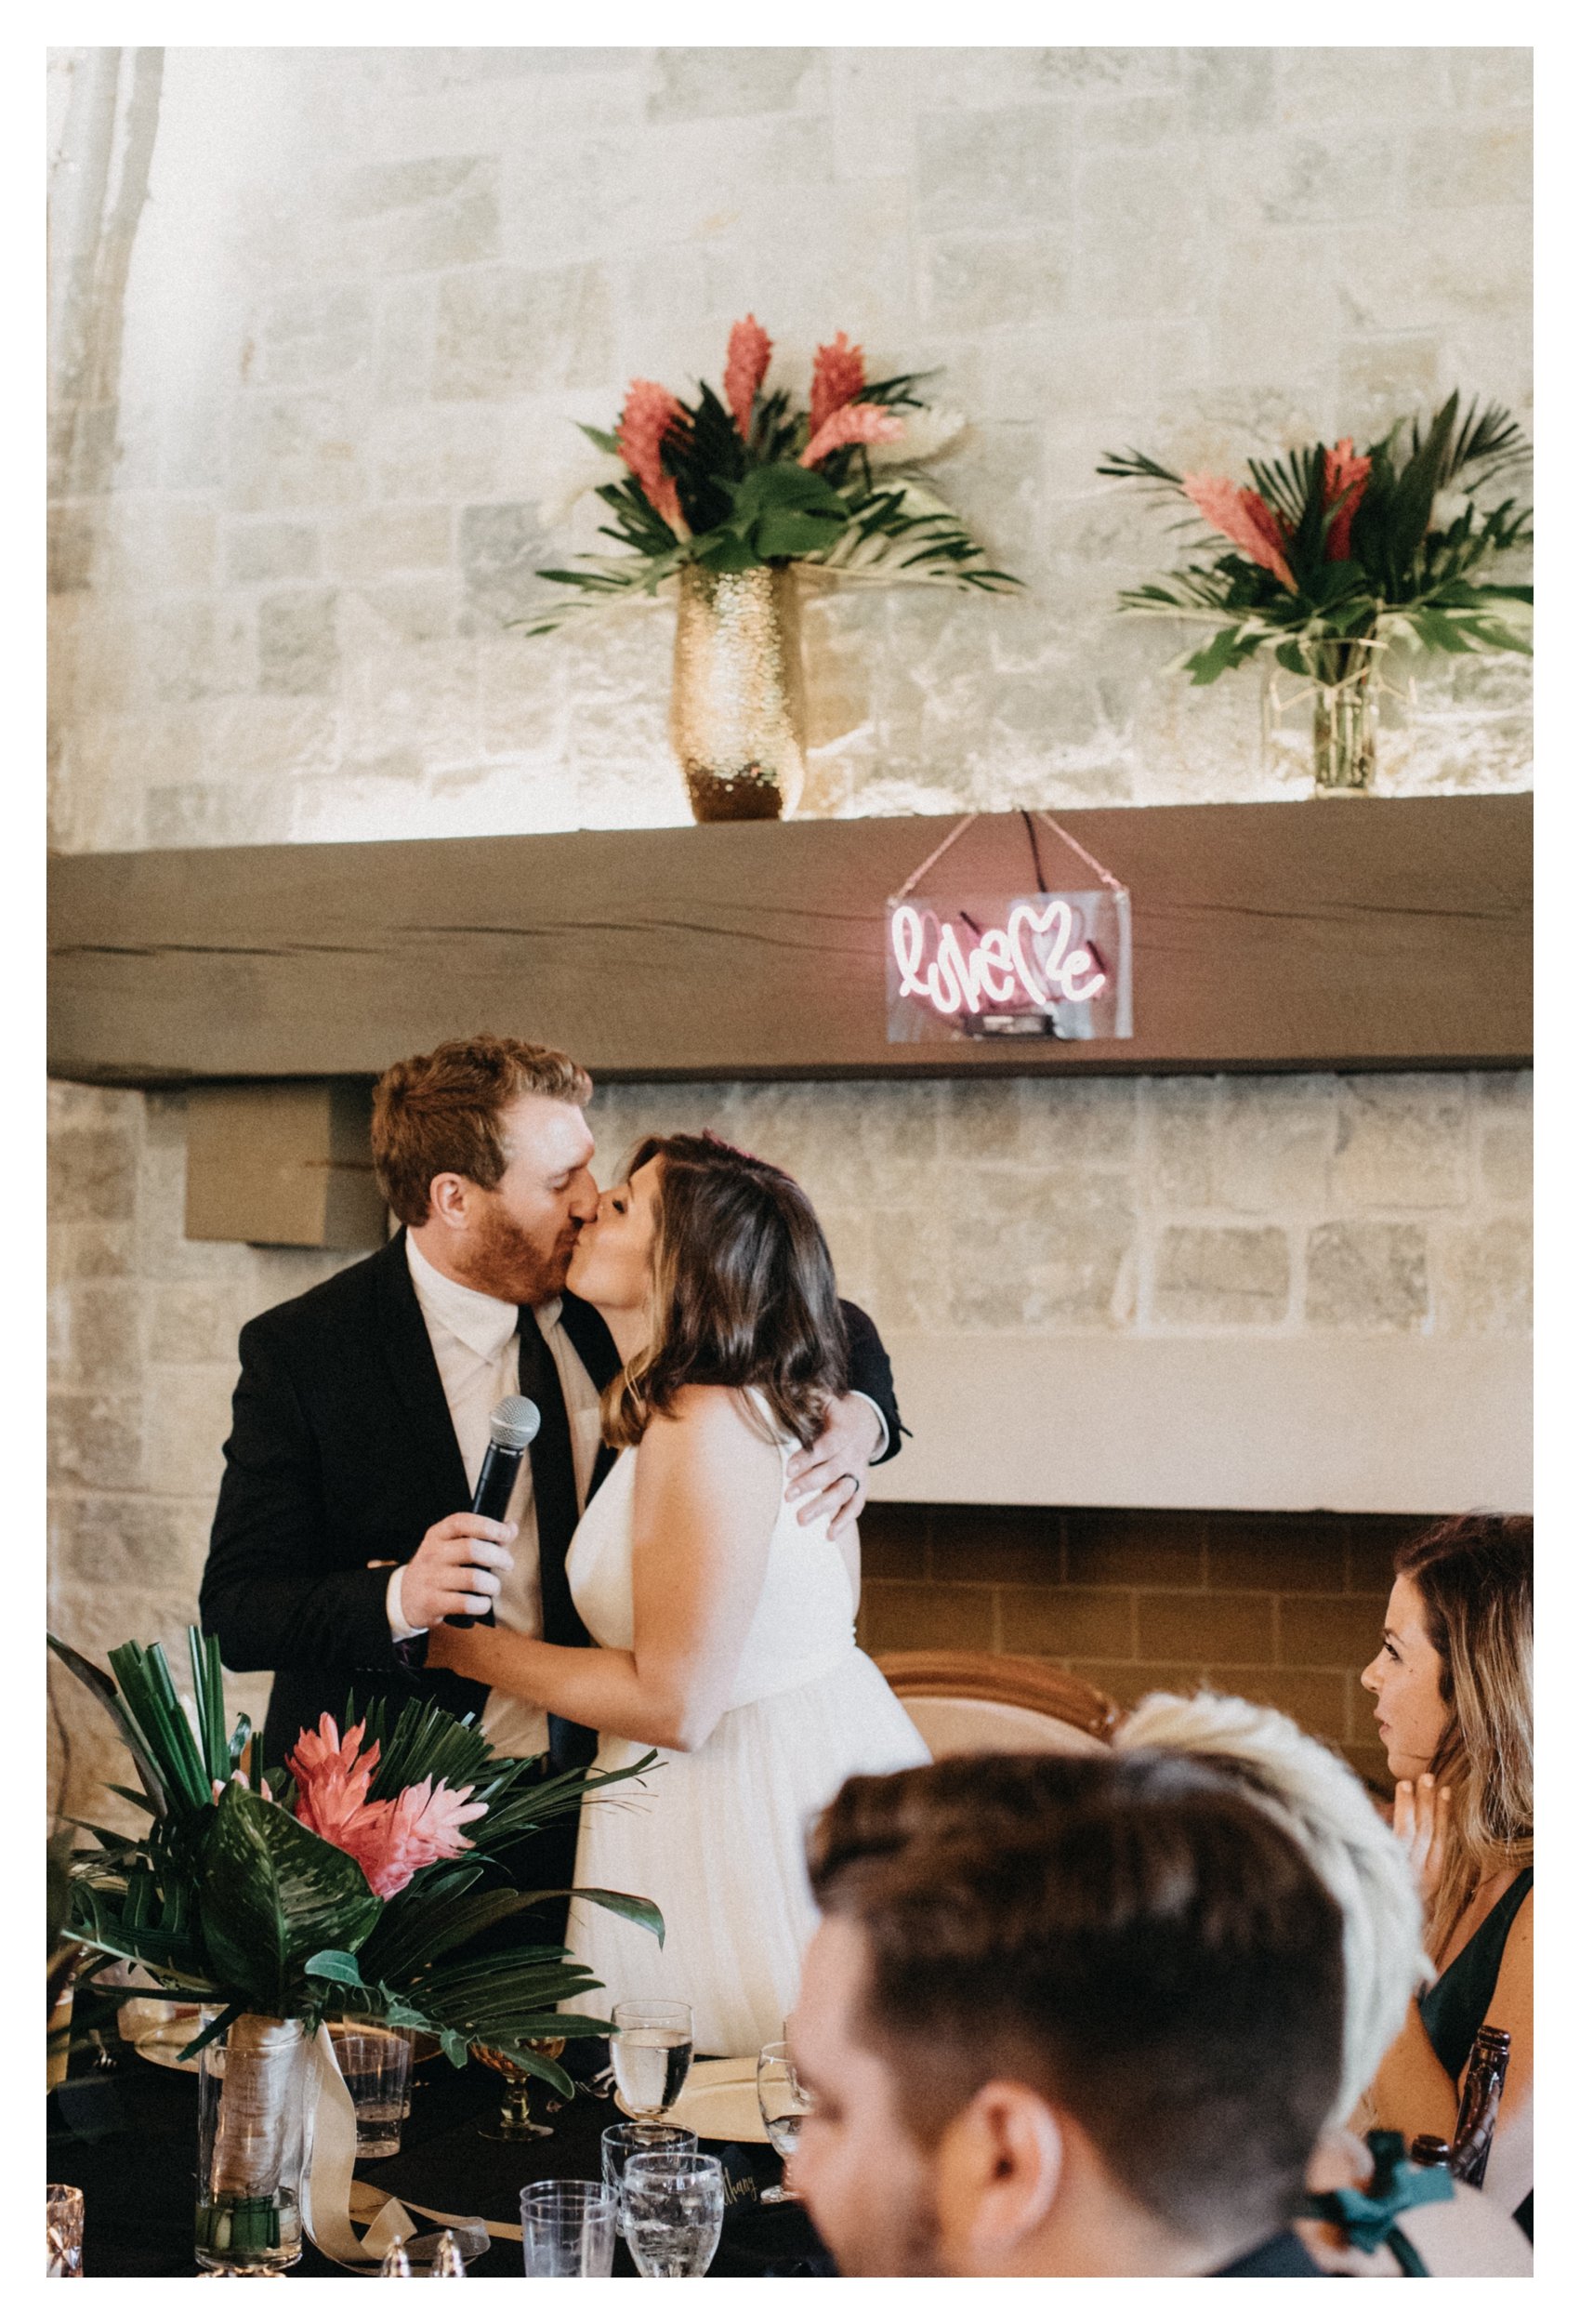 Bride and groom kissing in front of stone fireplace during 7 vines vineyard wedding reception